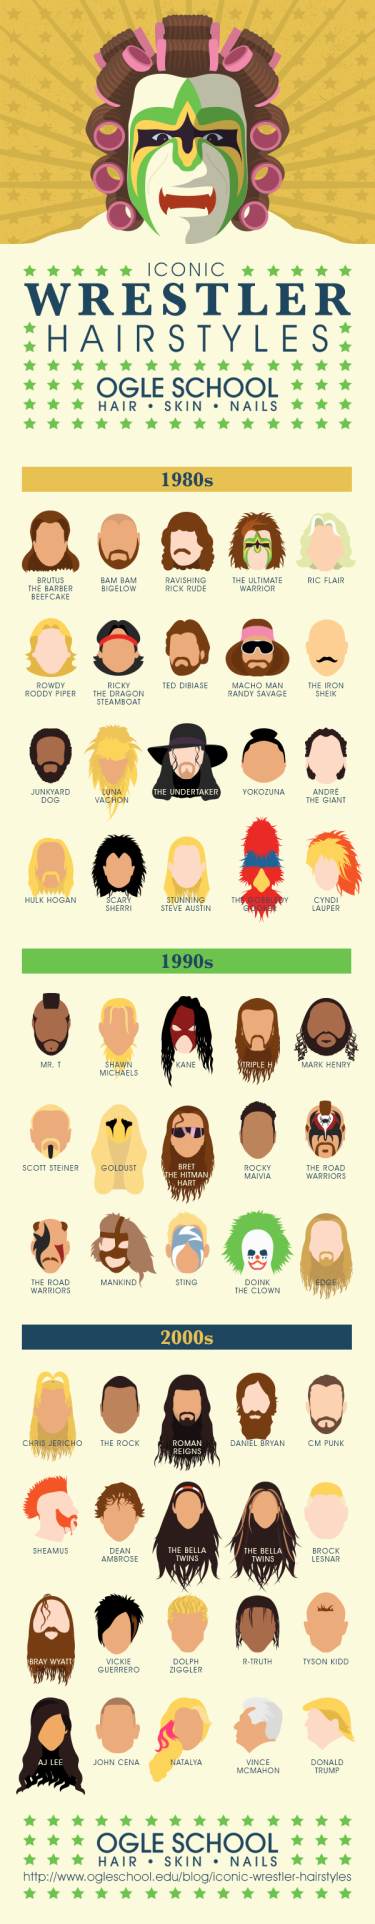 The Most Iconic Wrestler Hairstyles